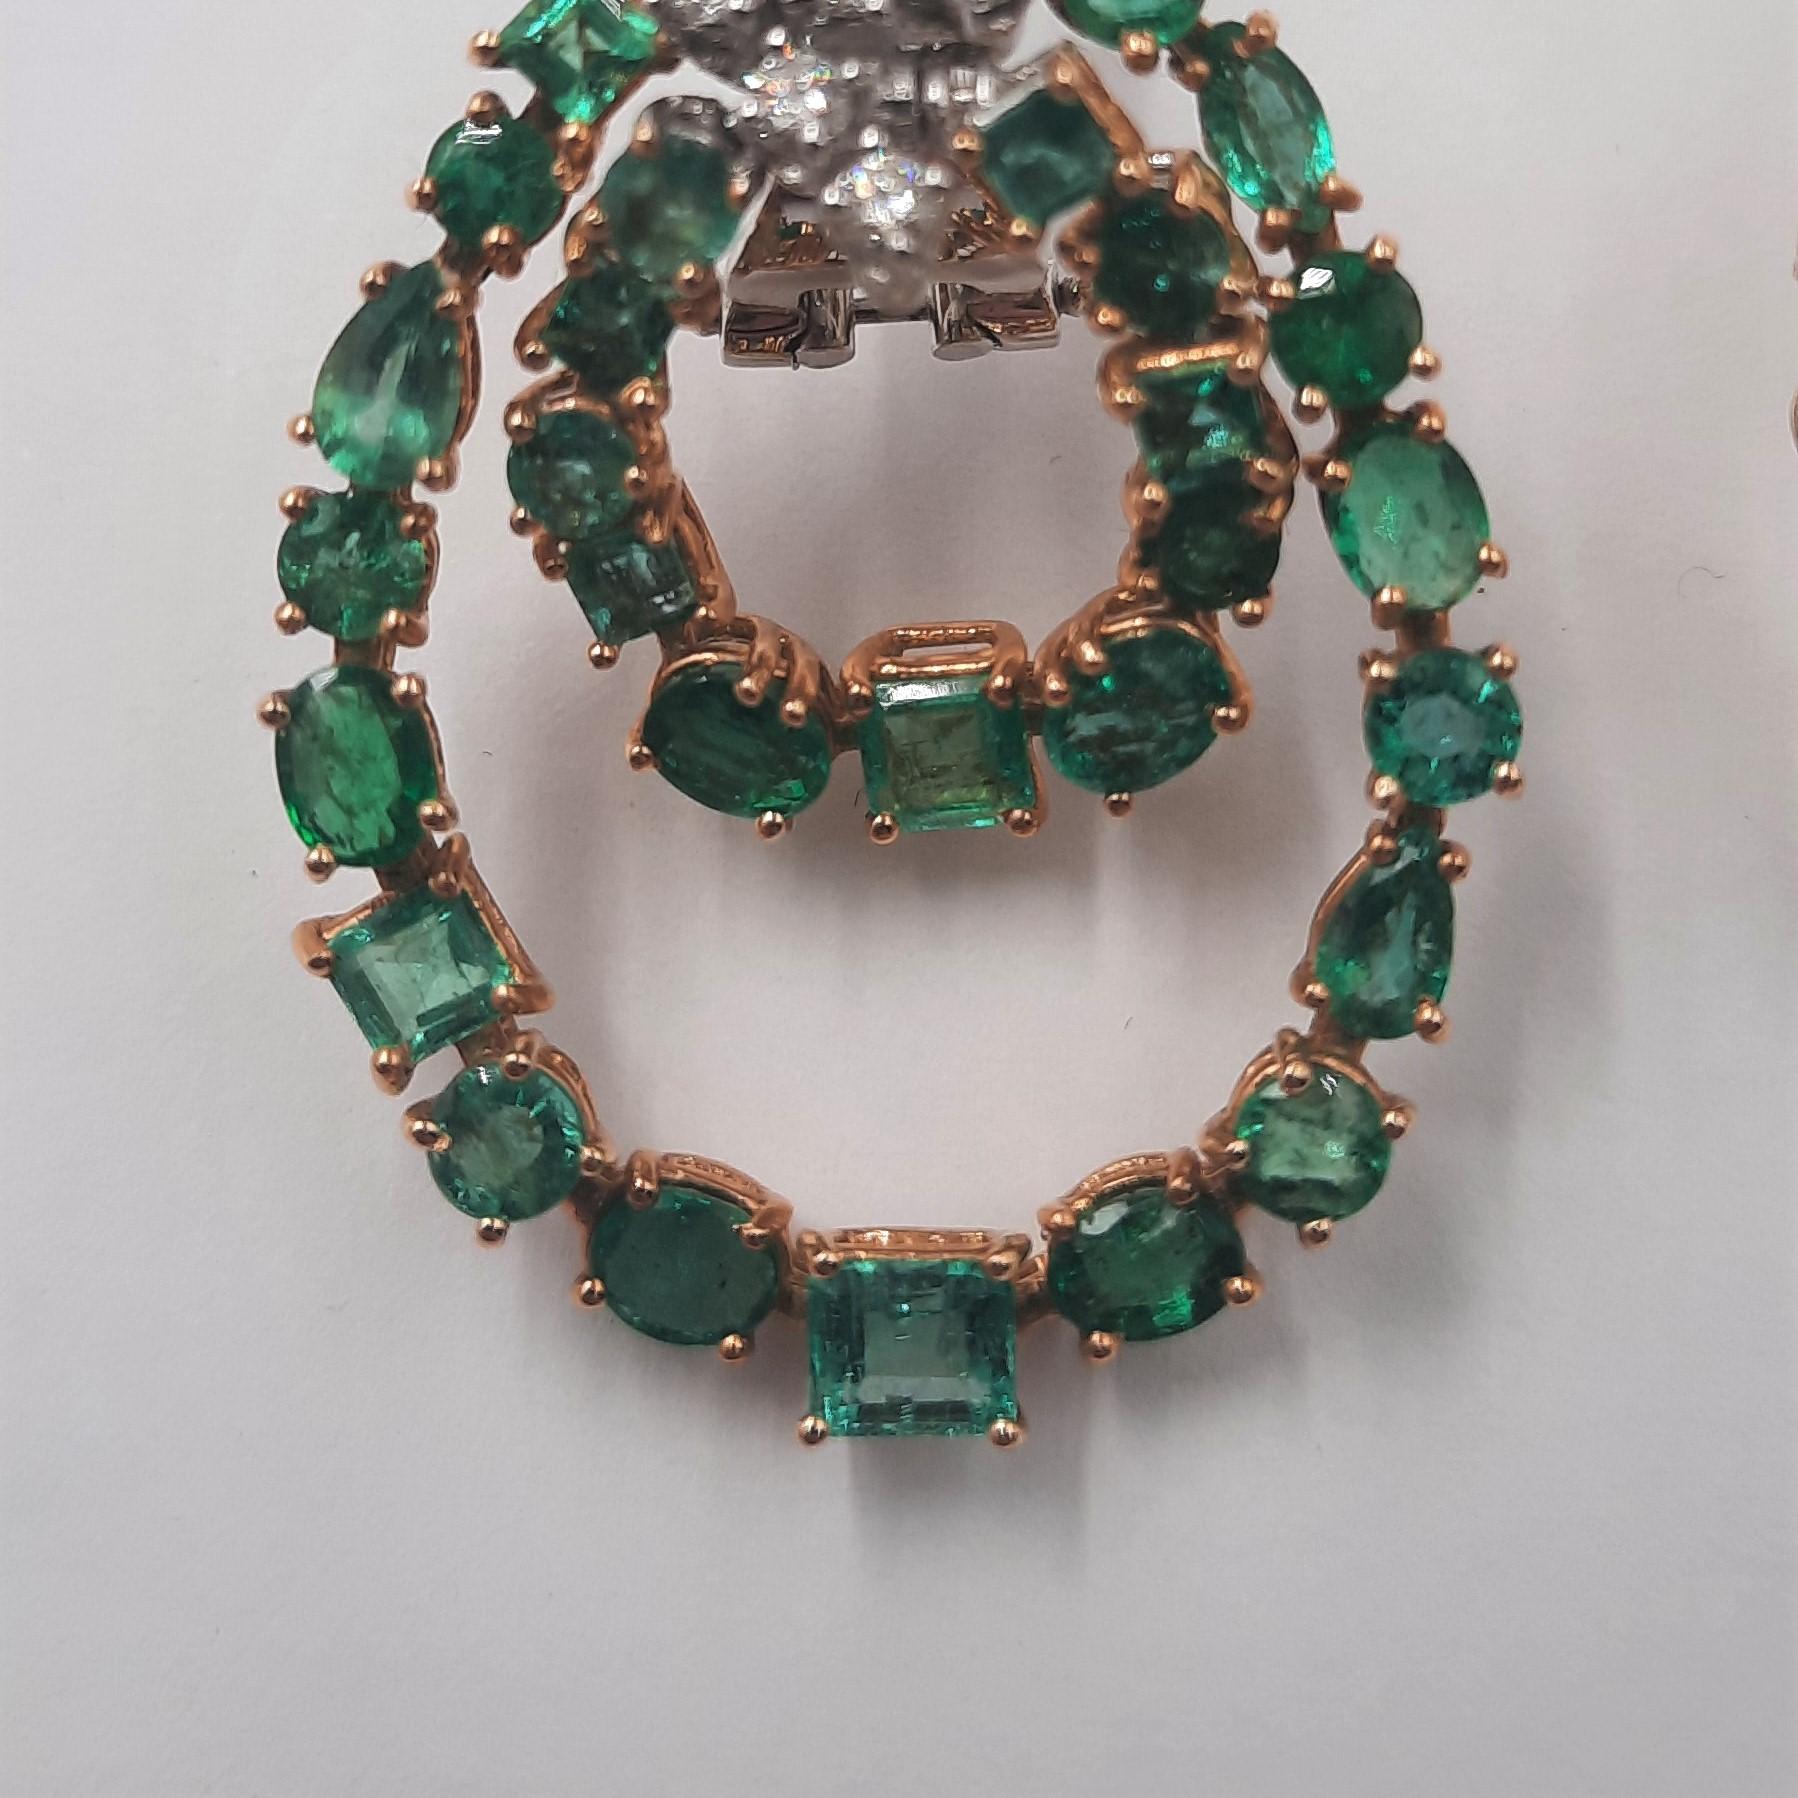 Brilliant Cut Diamond Emerald 18 Carats Yellow White Gold Earrings In New Condition For Sale In Marcianise, CE, IT